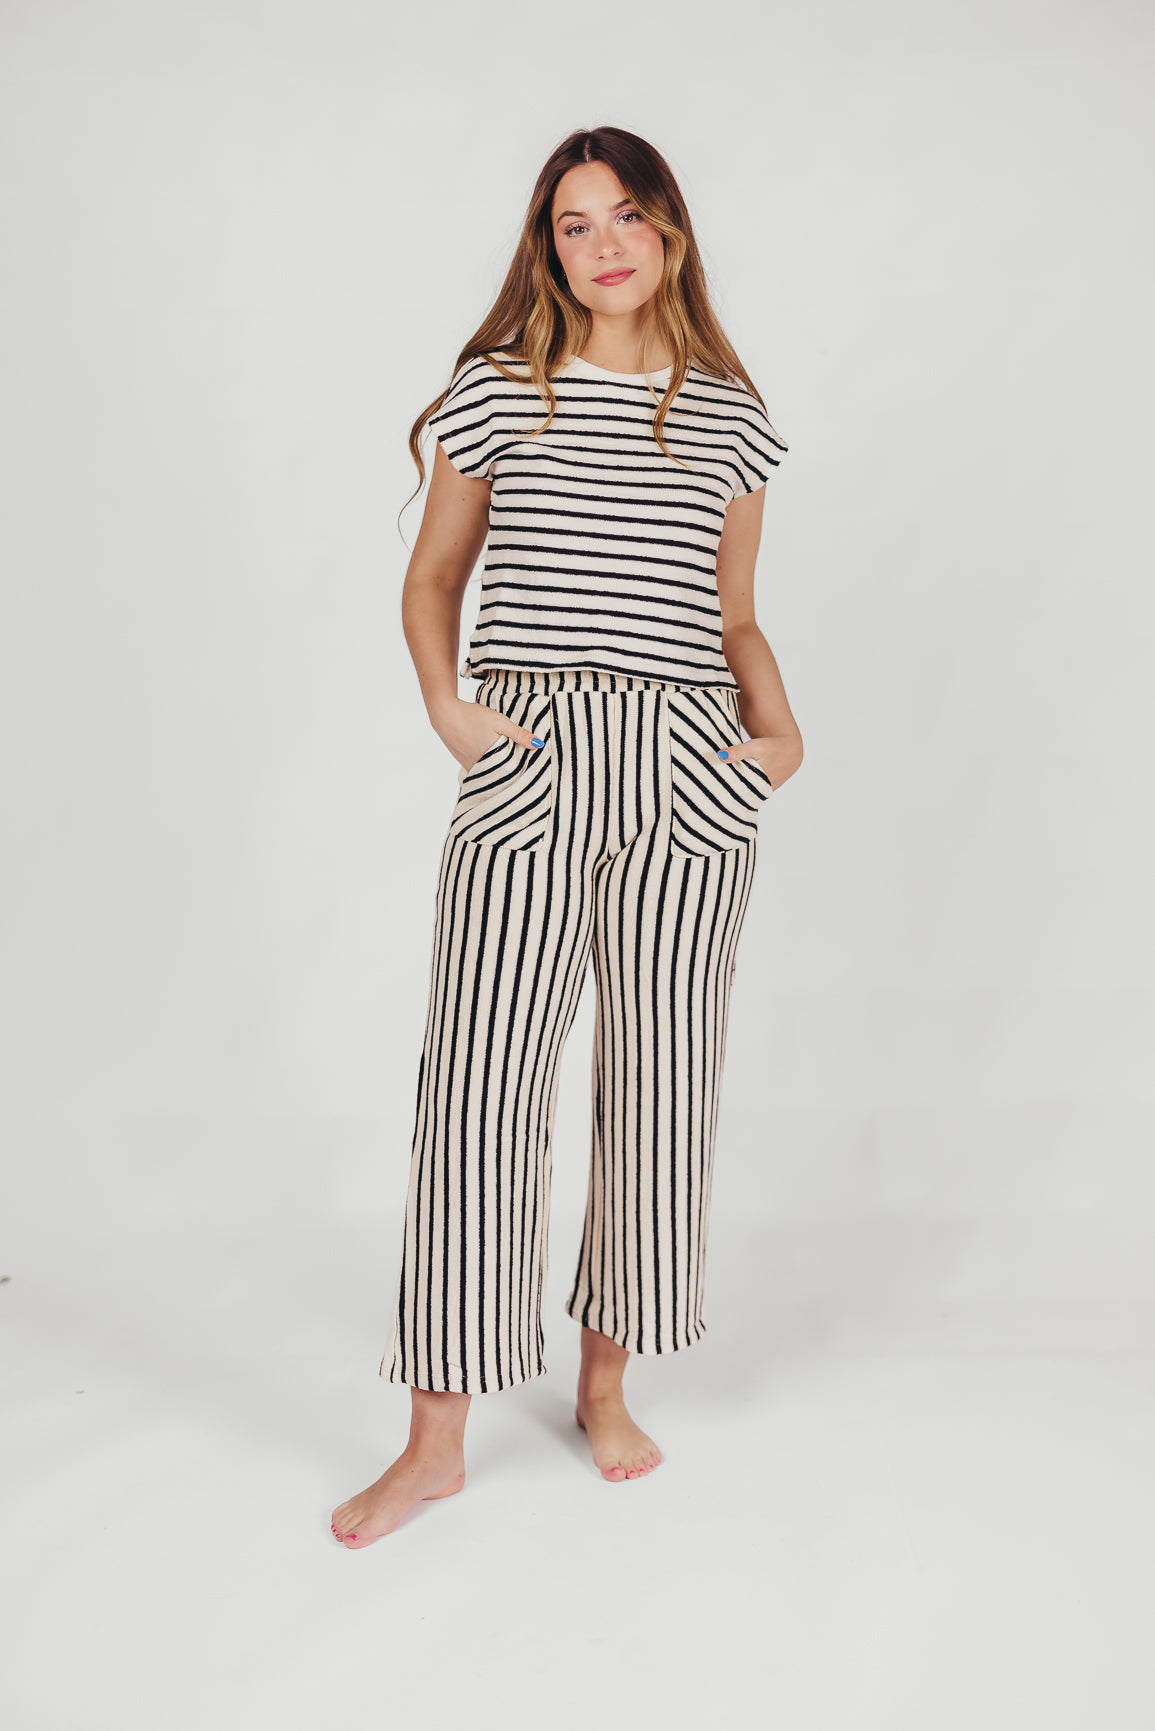 Evie Textured Cotton Top and Pants Set in White/Black